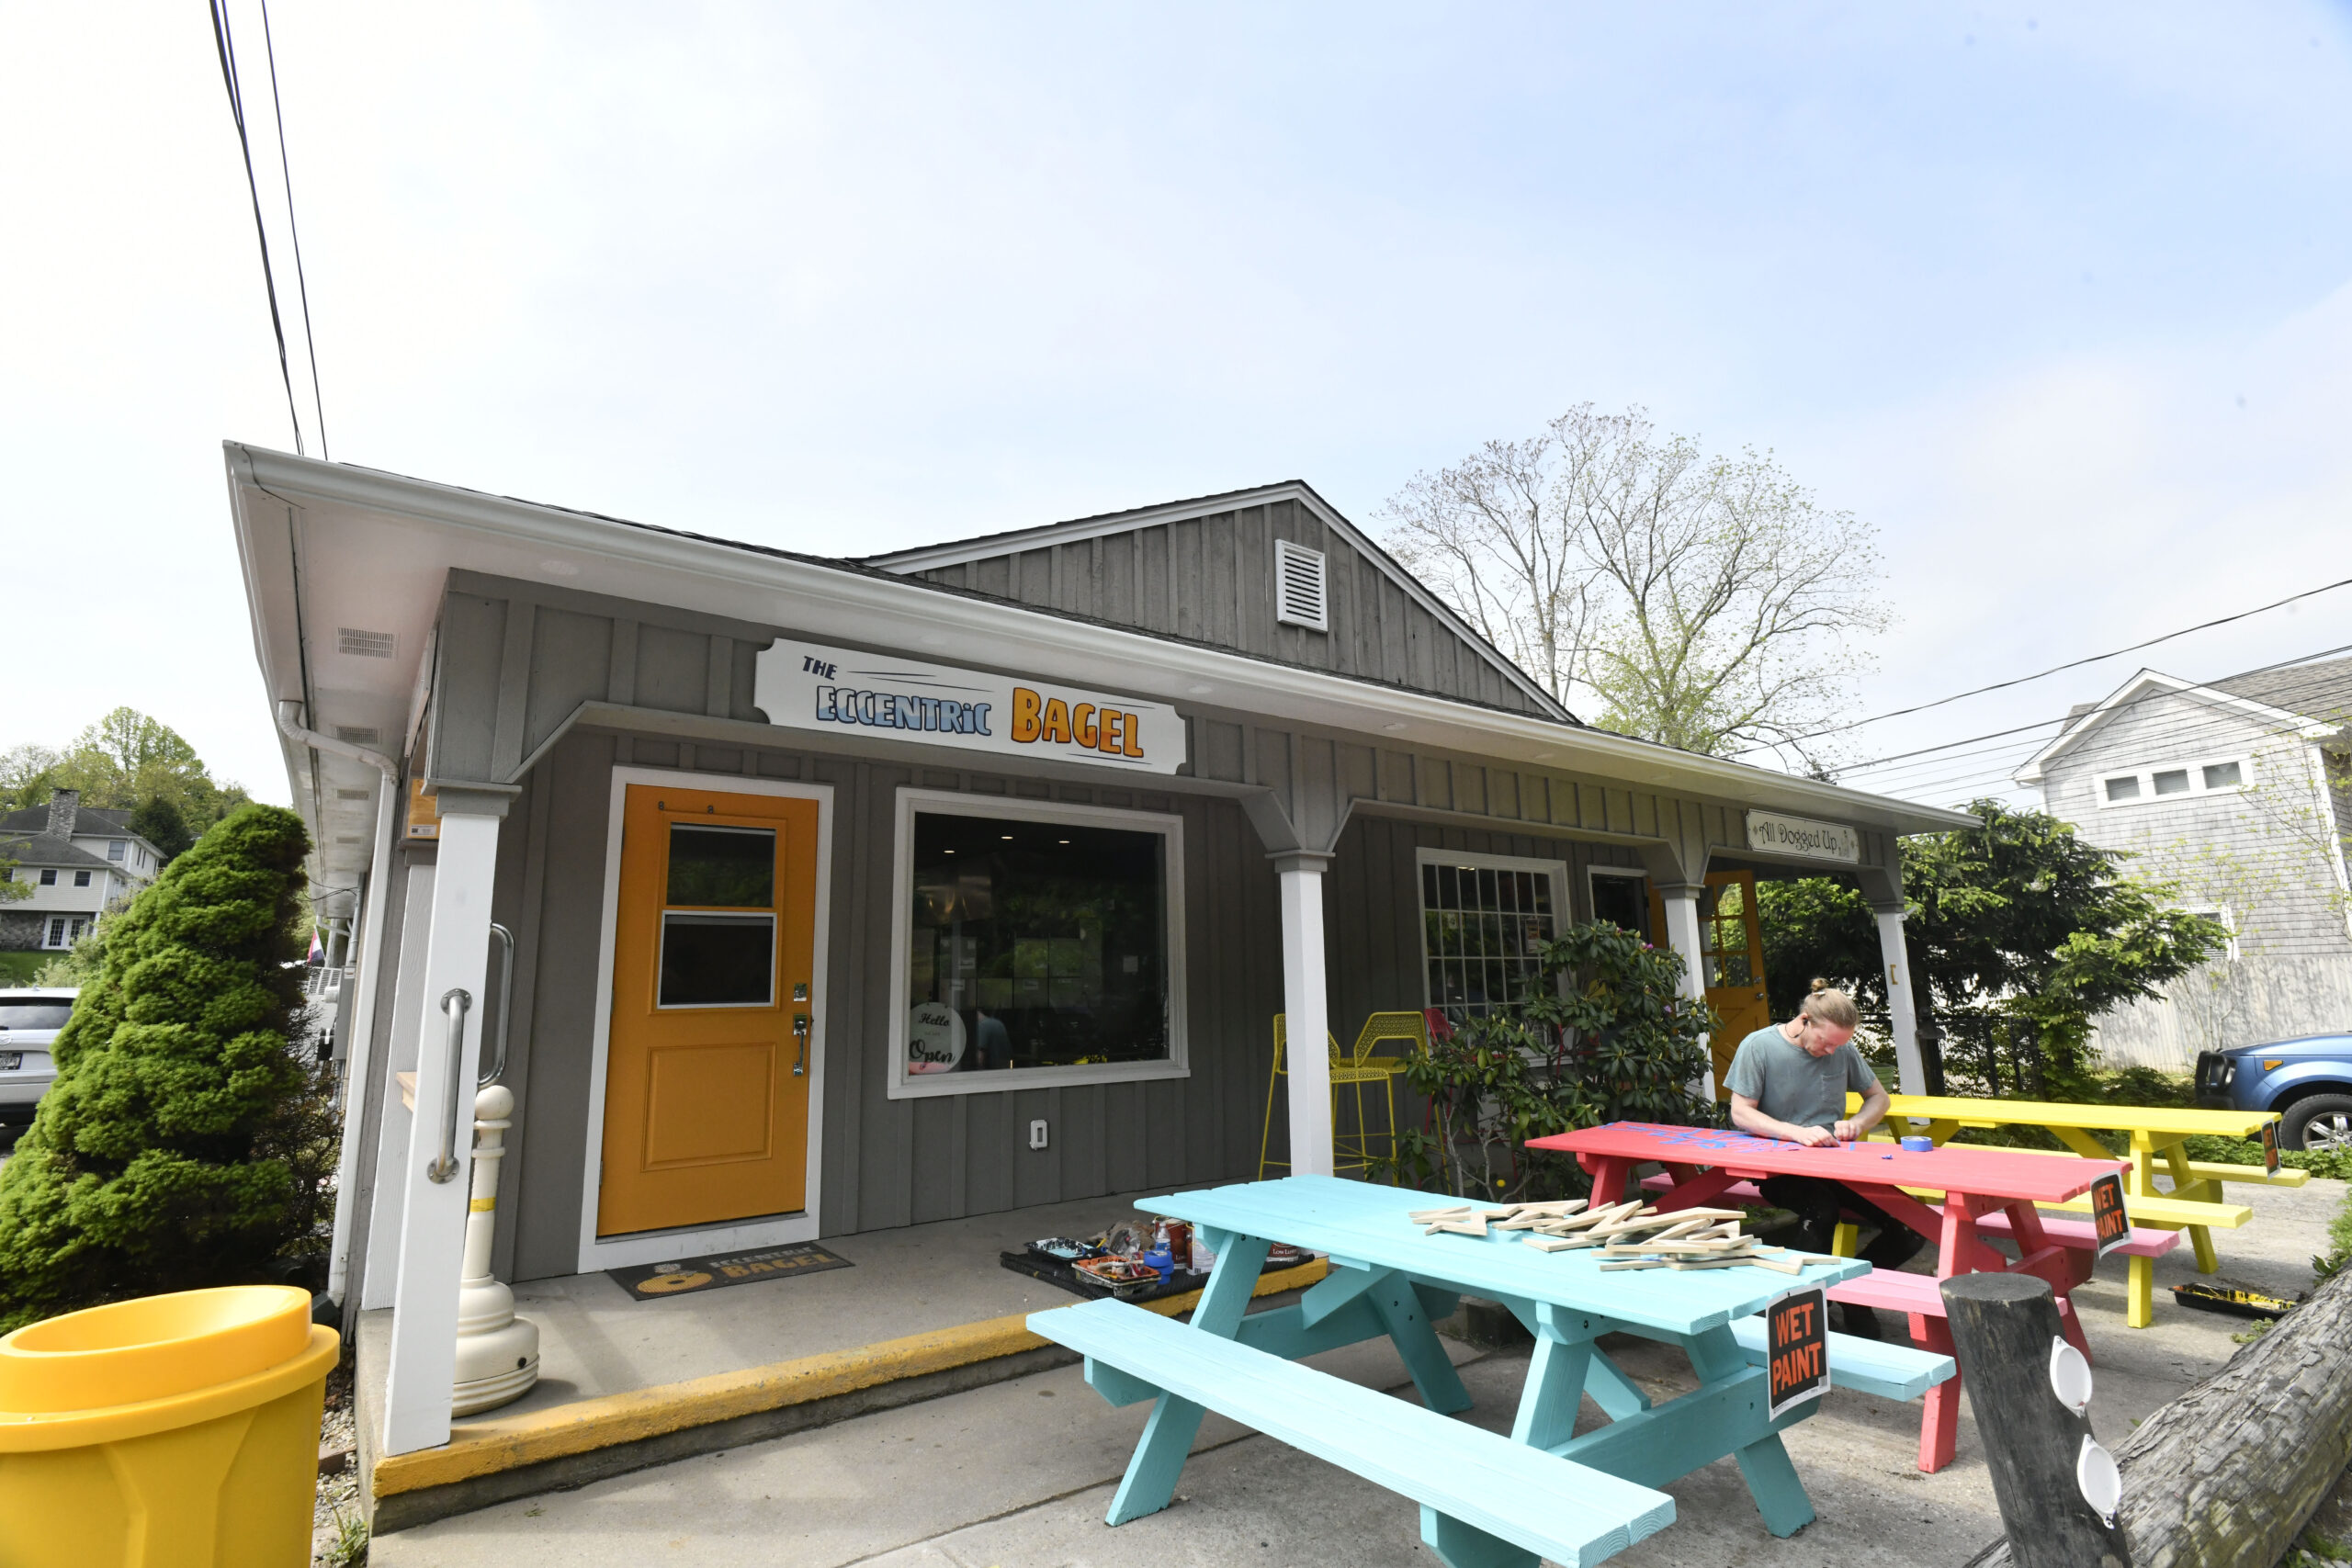 Eccentric Bagel Brings New York’s Iconic Bagel to Shelter Island